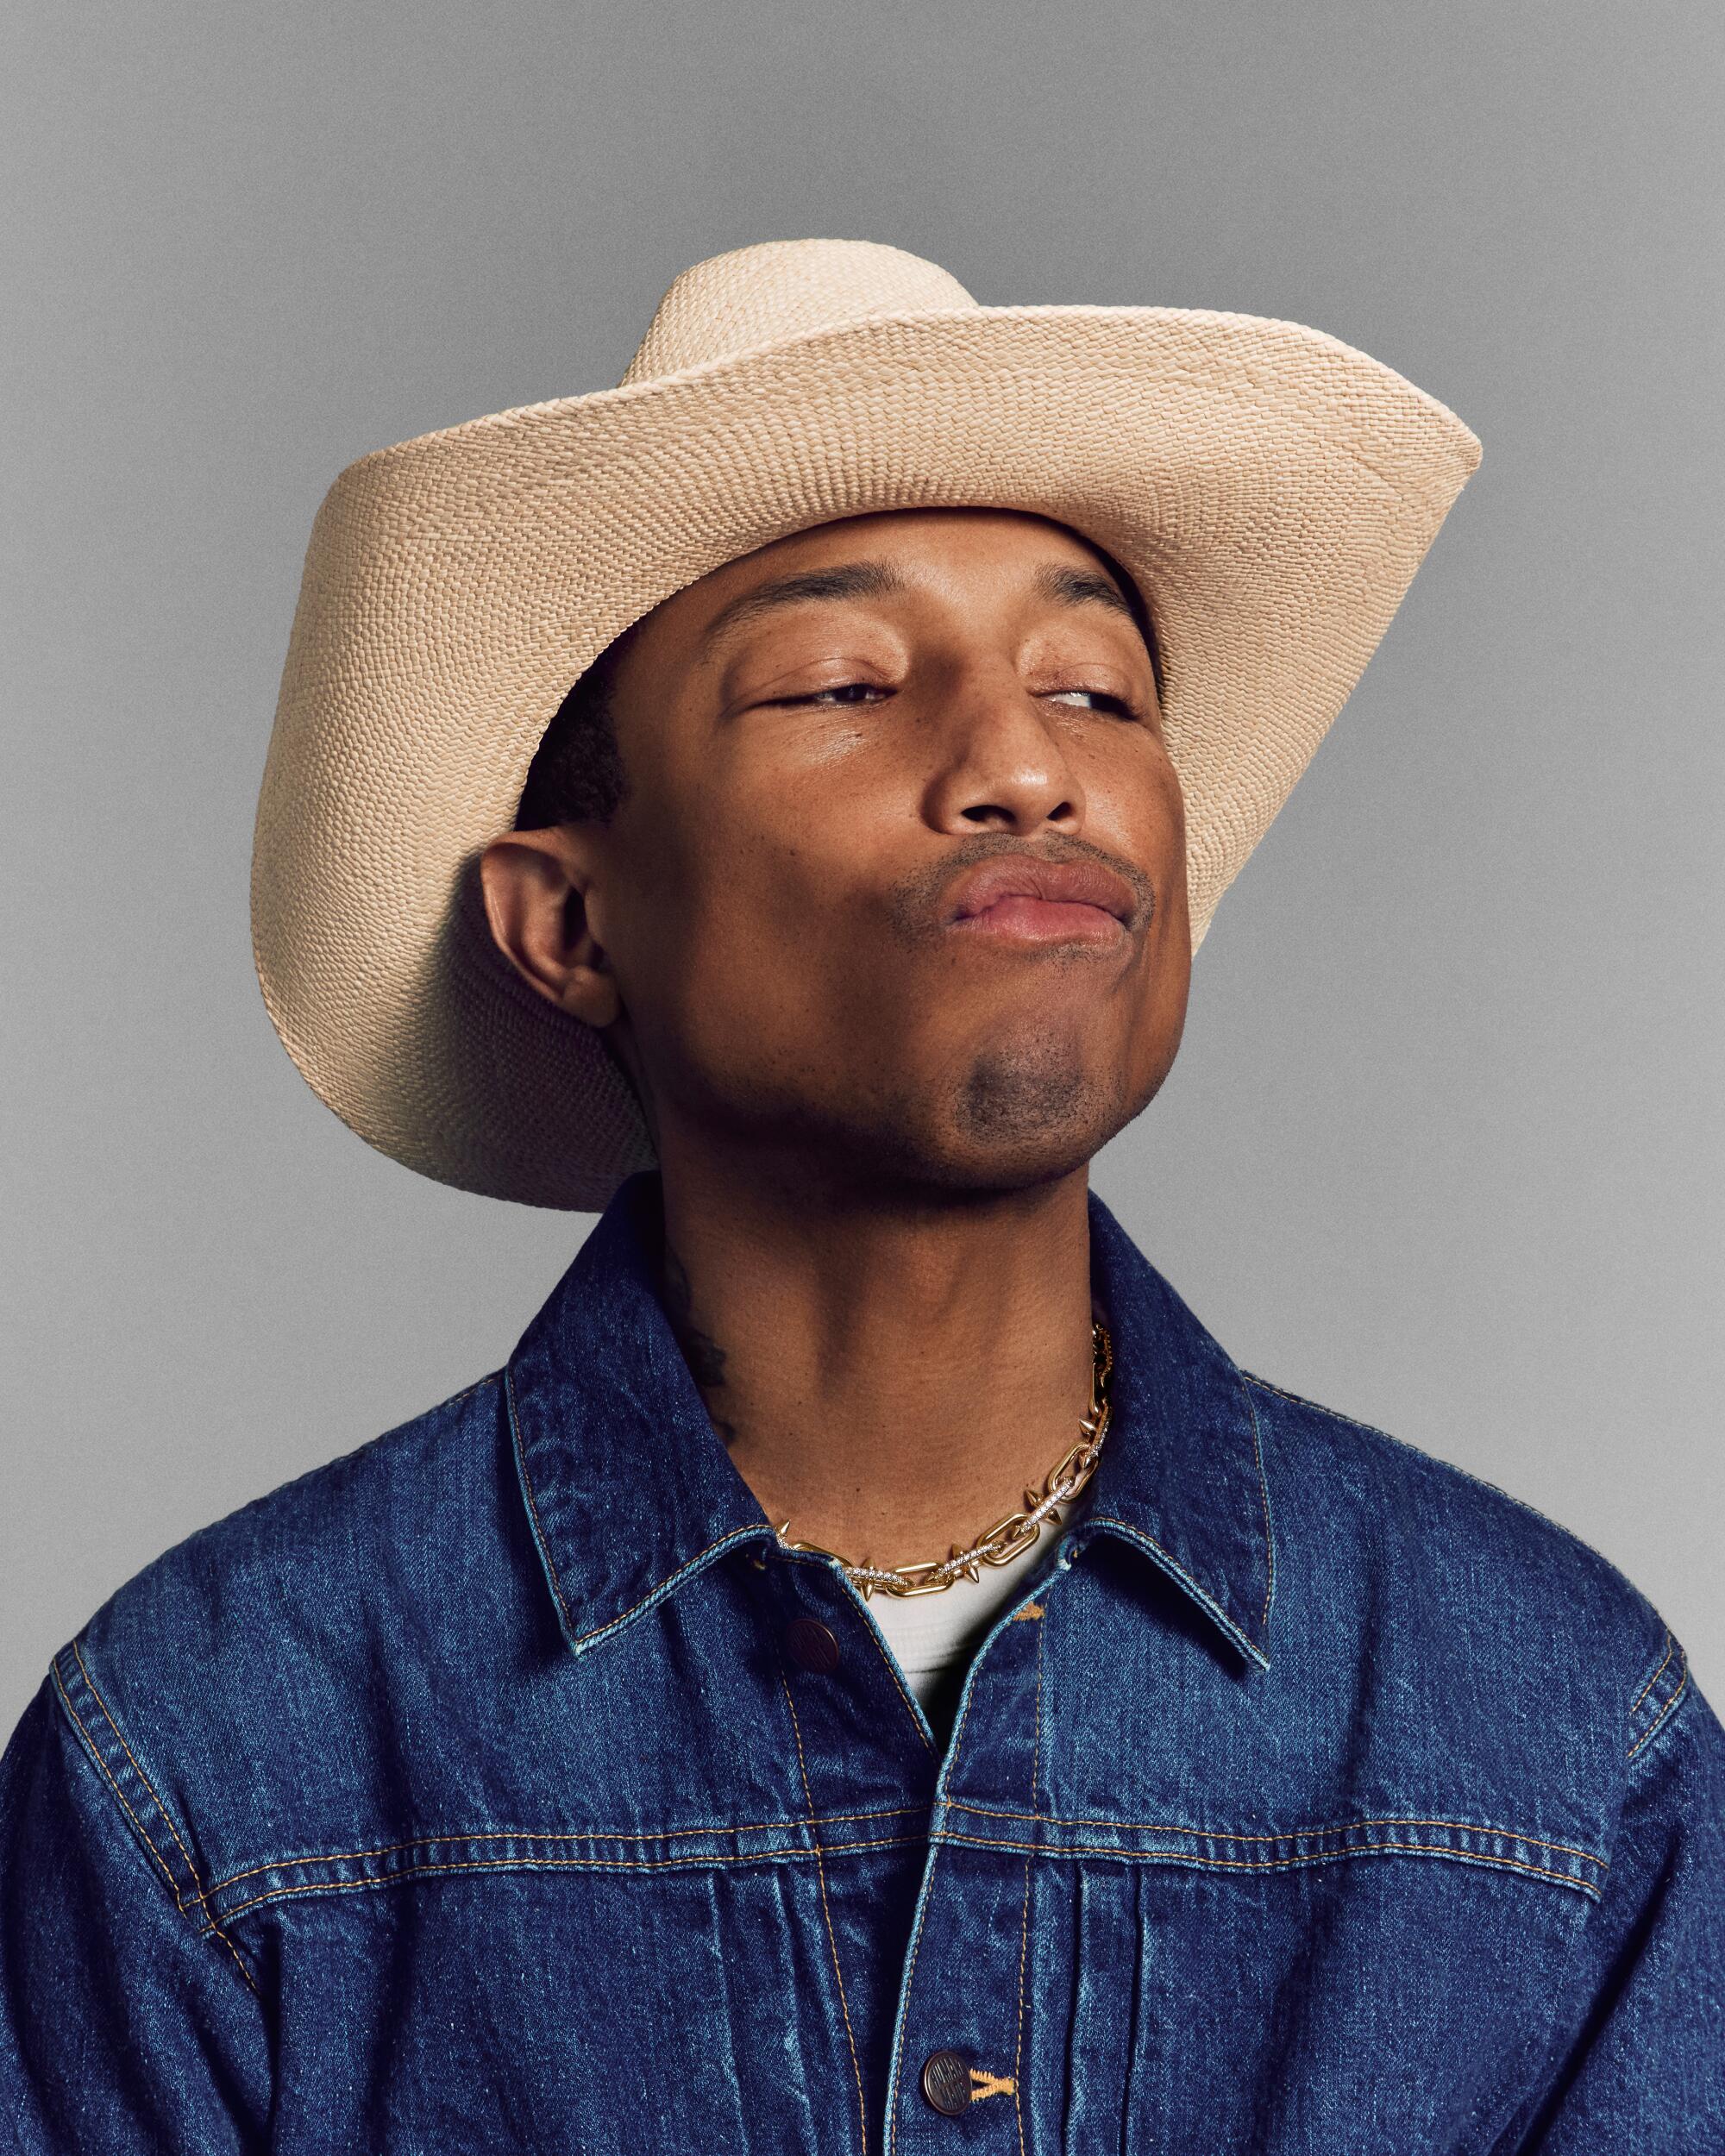 Pharrell Williams in a cowboy hat and denim shirt, pursing his lips